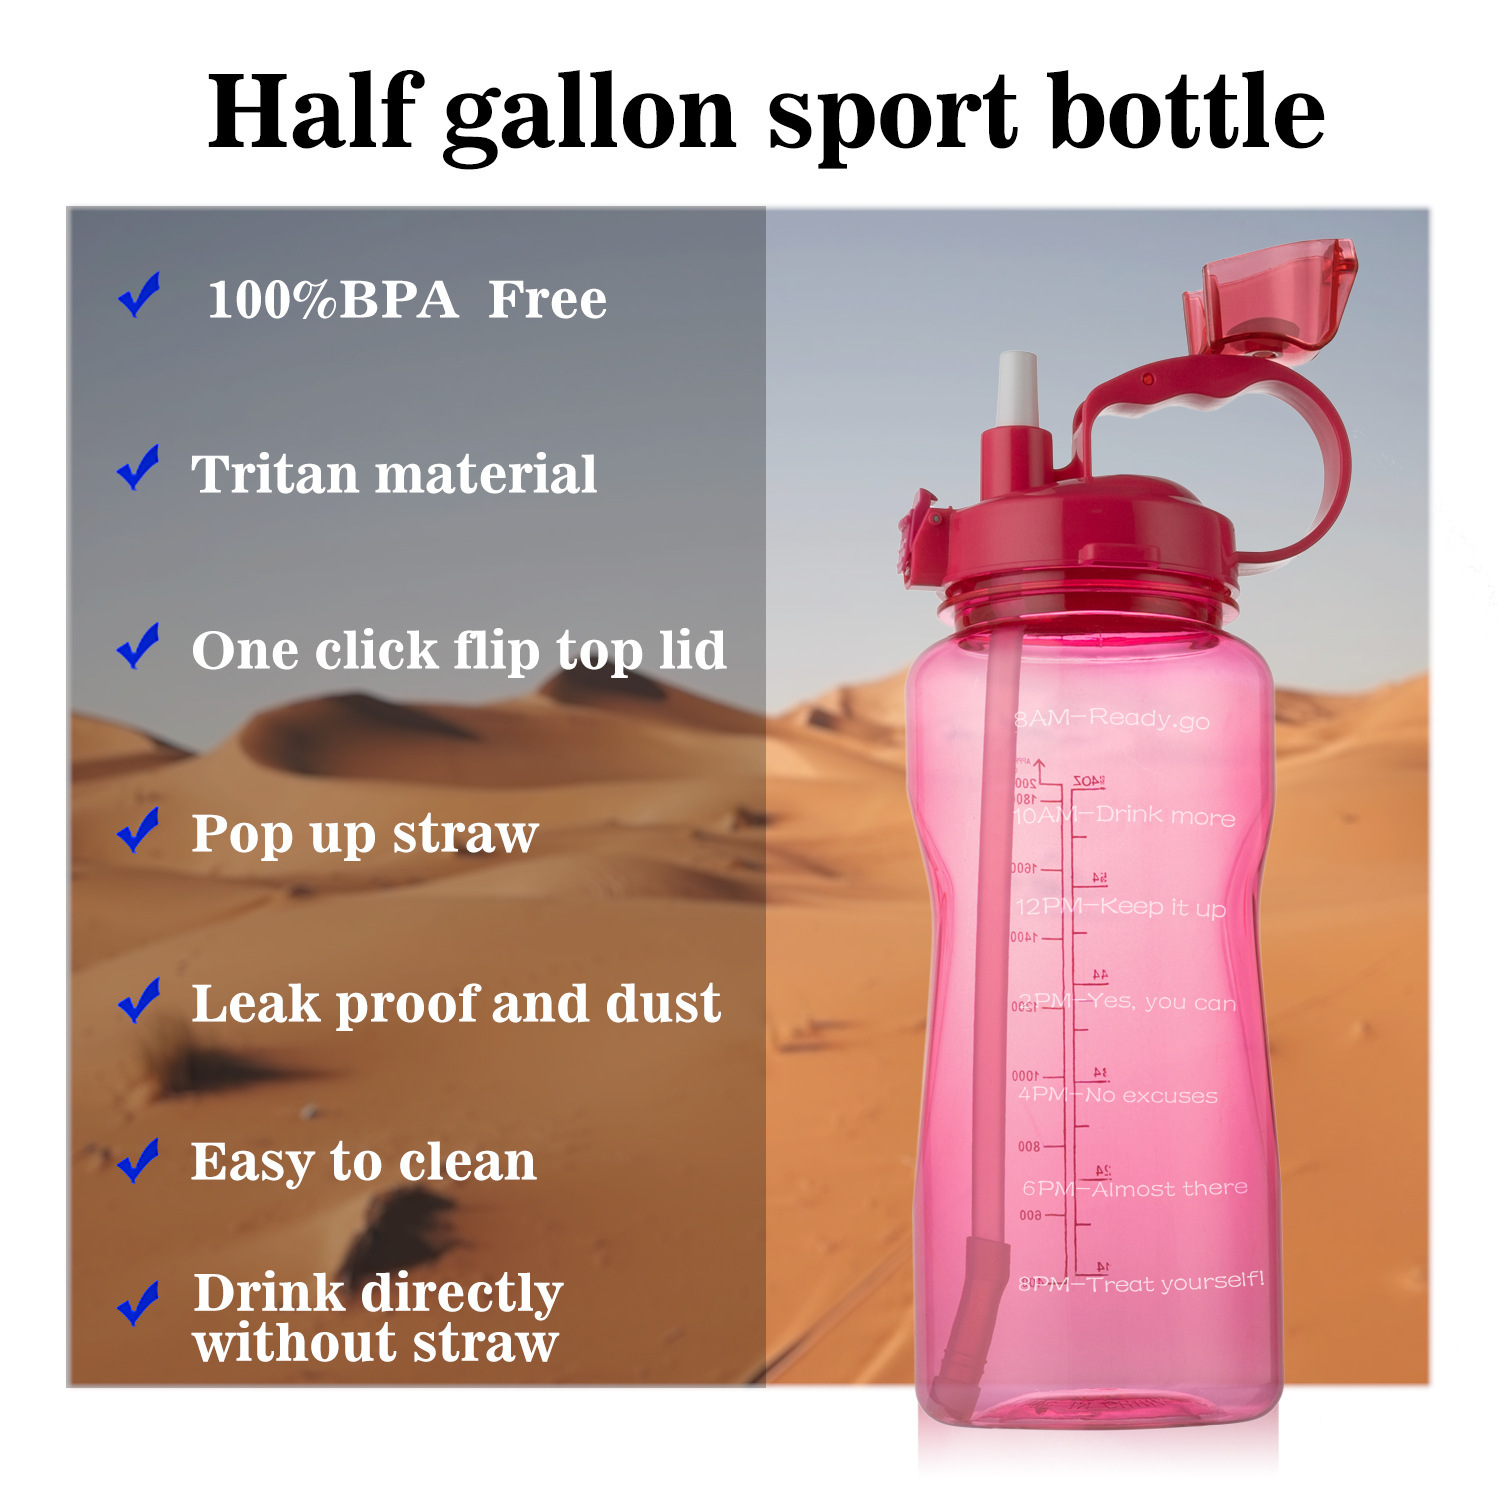 Gemful 1 Gallon Motivational Water Bottle With Time Marker And